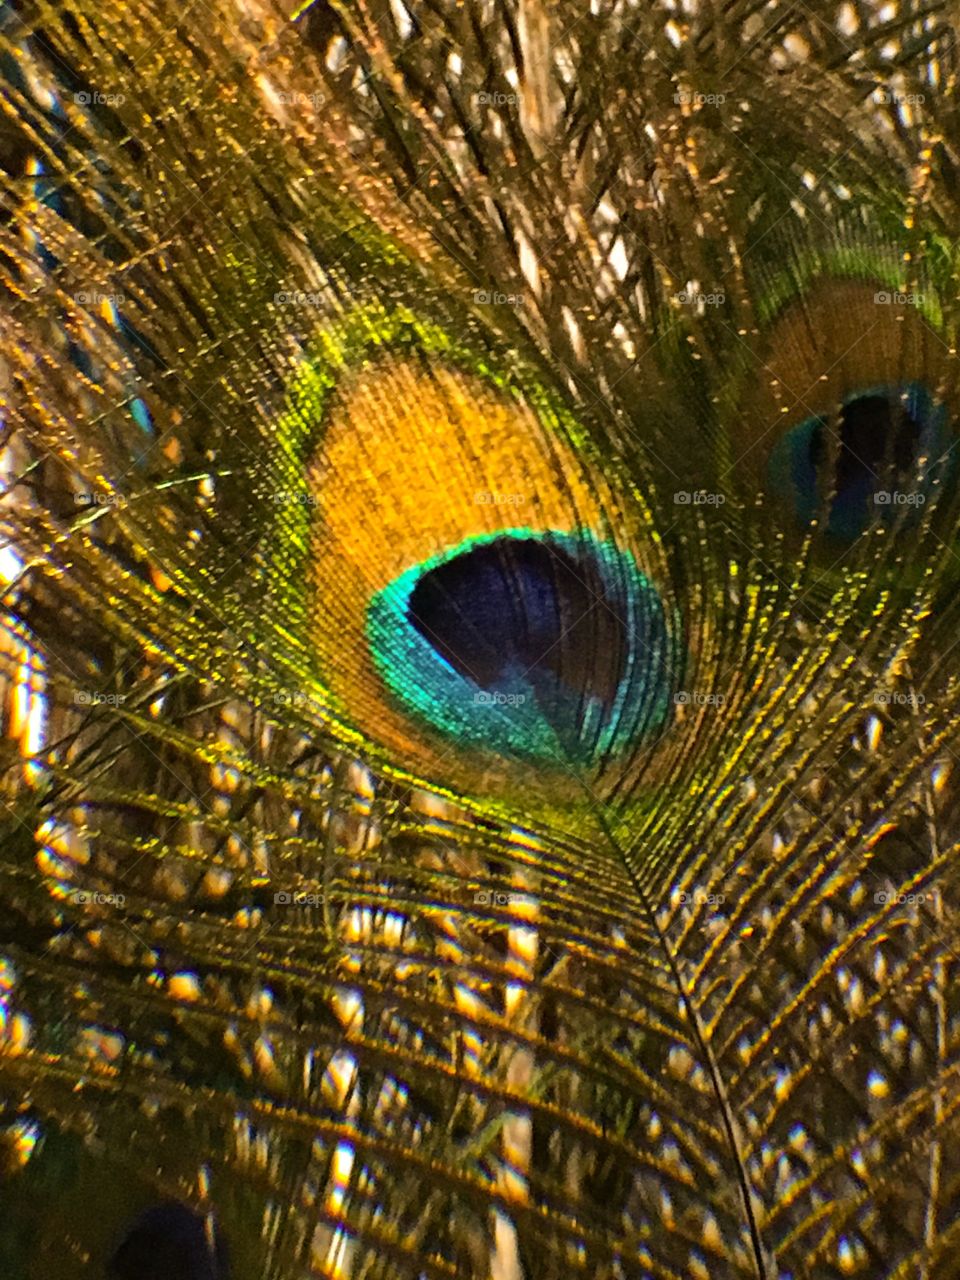 Peacock feather 